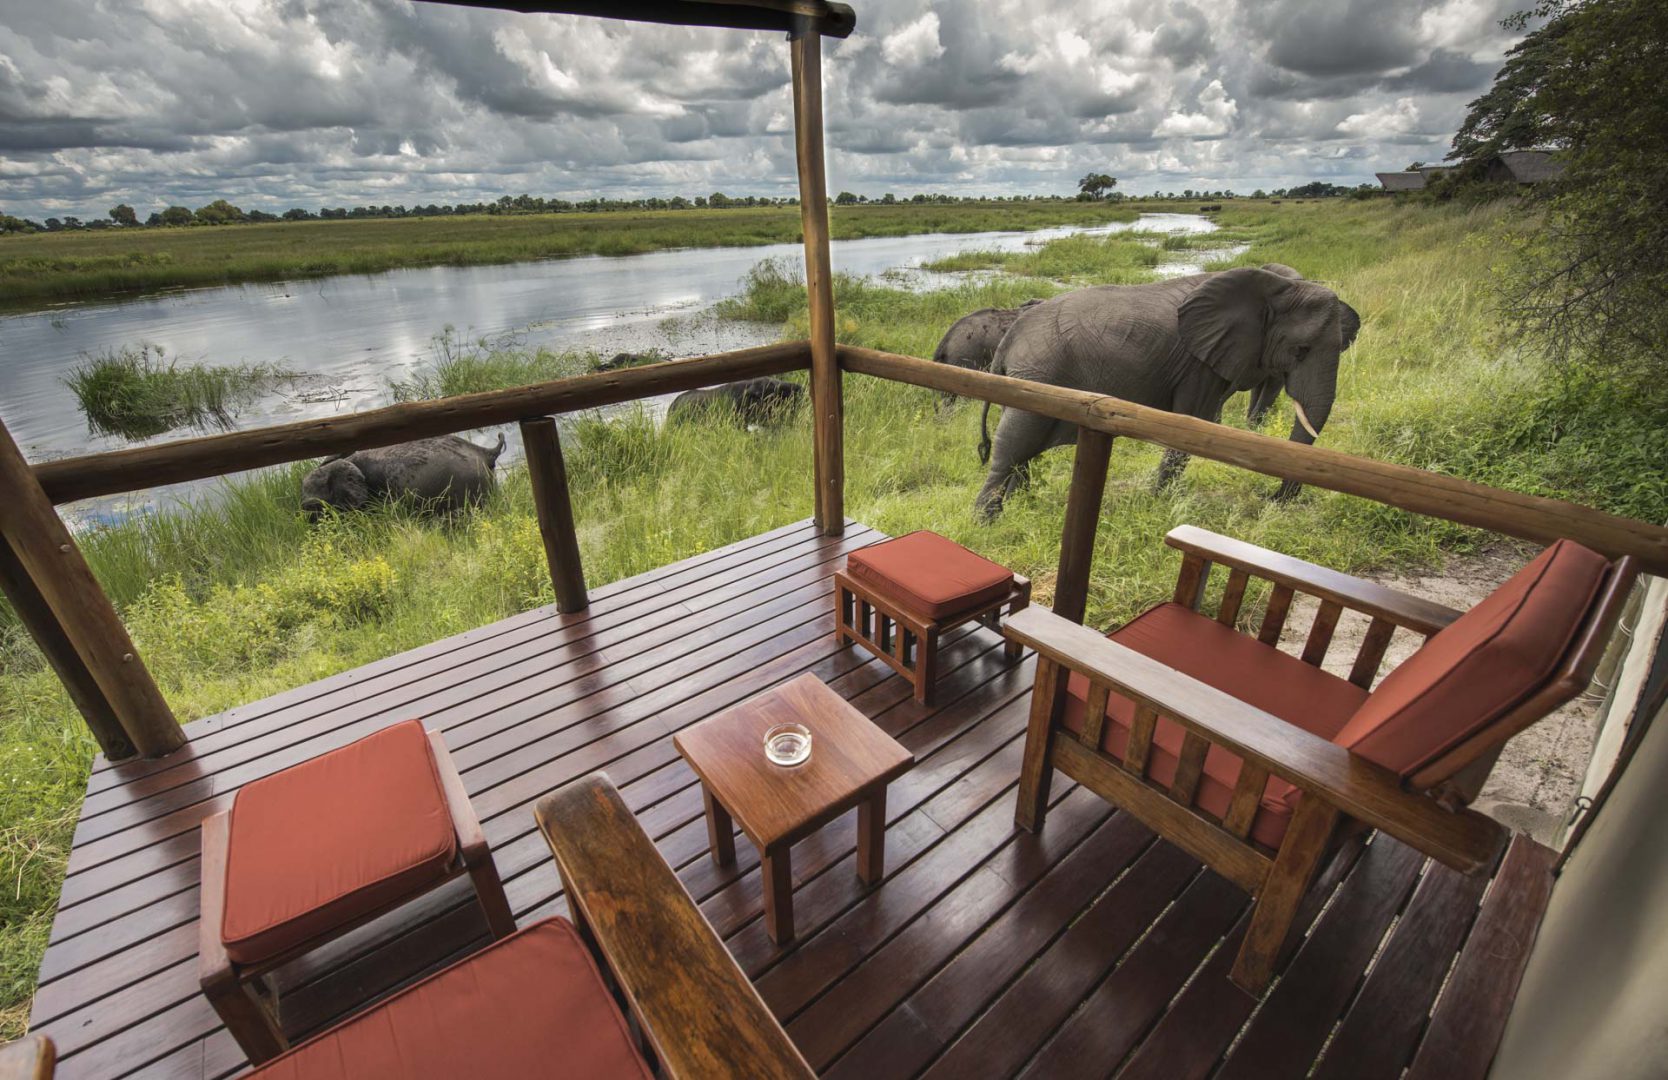 Deck with a view on elephants watering place